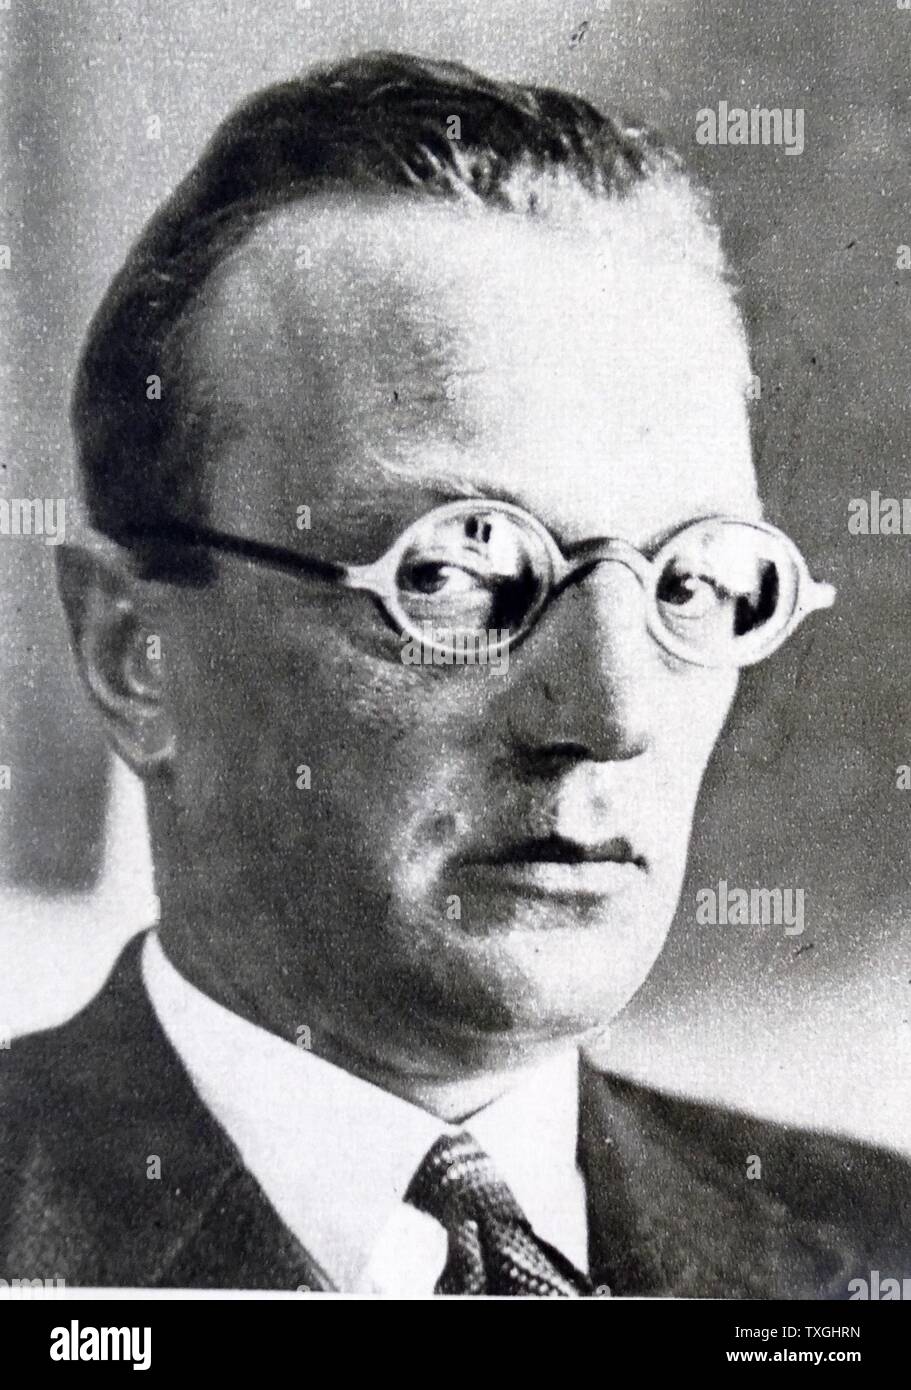 Photographic portrait of Arthur Seyss-Inquart (1892-1946) an Austrian Nazi politician who served as Chancellor of Austria and later served as the Third Reich in the General Government of Poland and as Reichskommissar in the Netherlands. Dated 20th Century Stock Photo